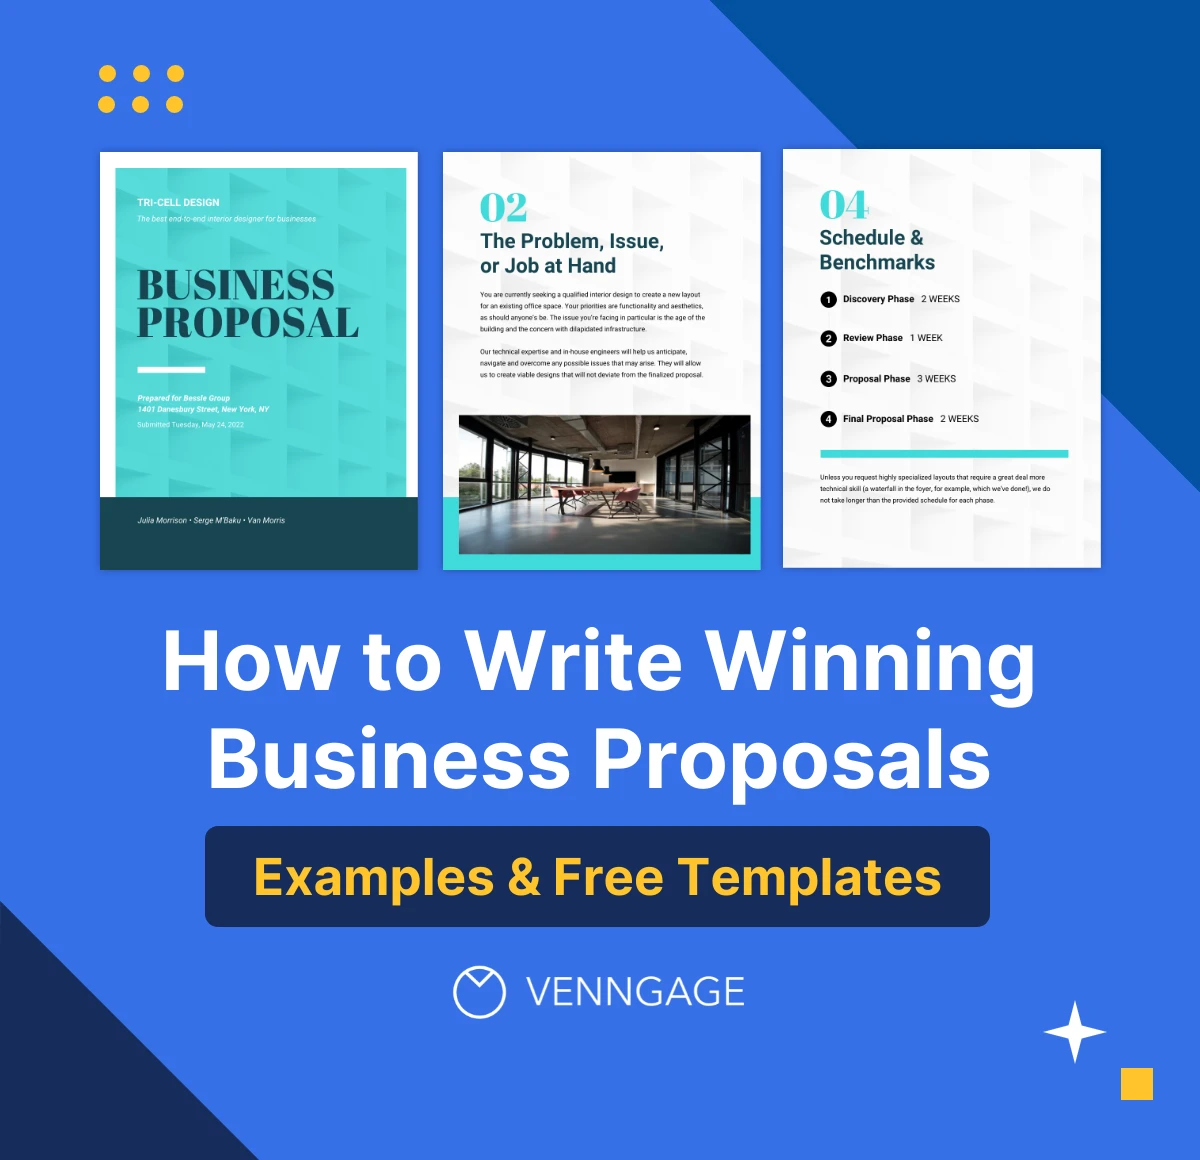 Write Winning Business Proposals with Venngage